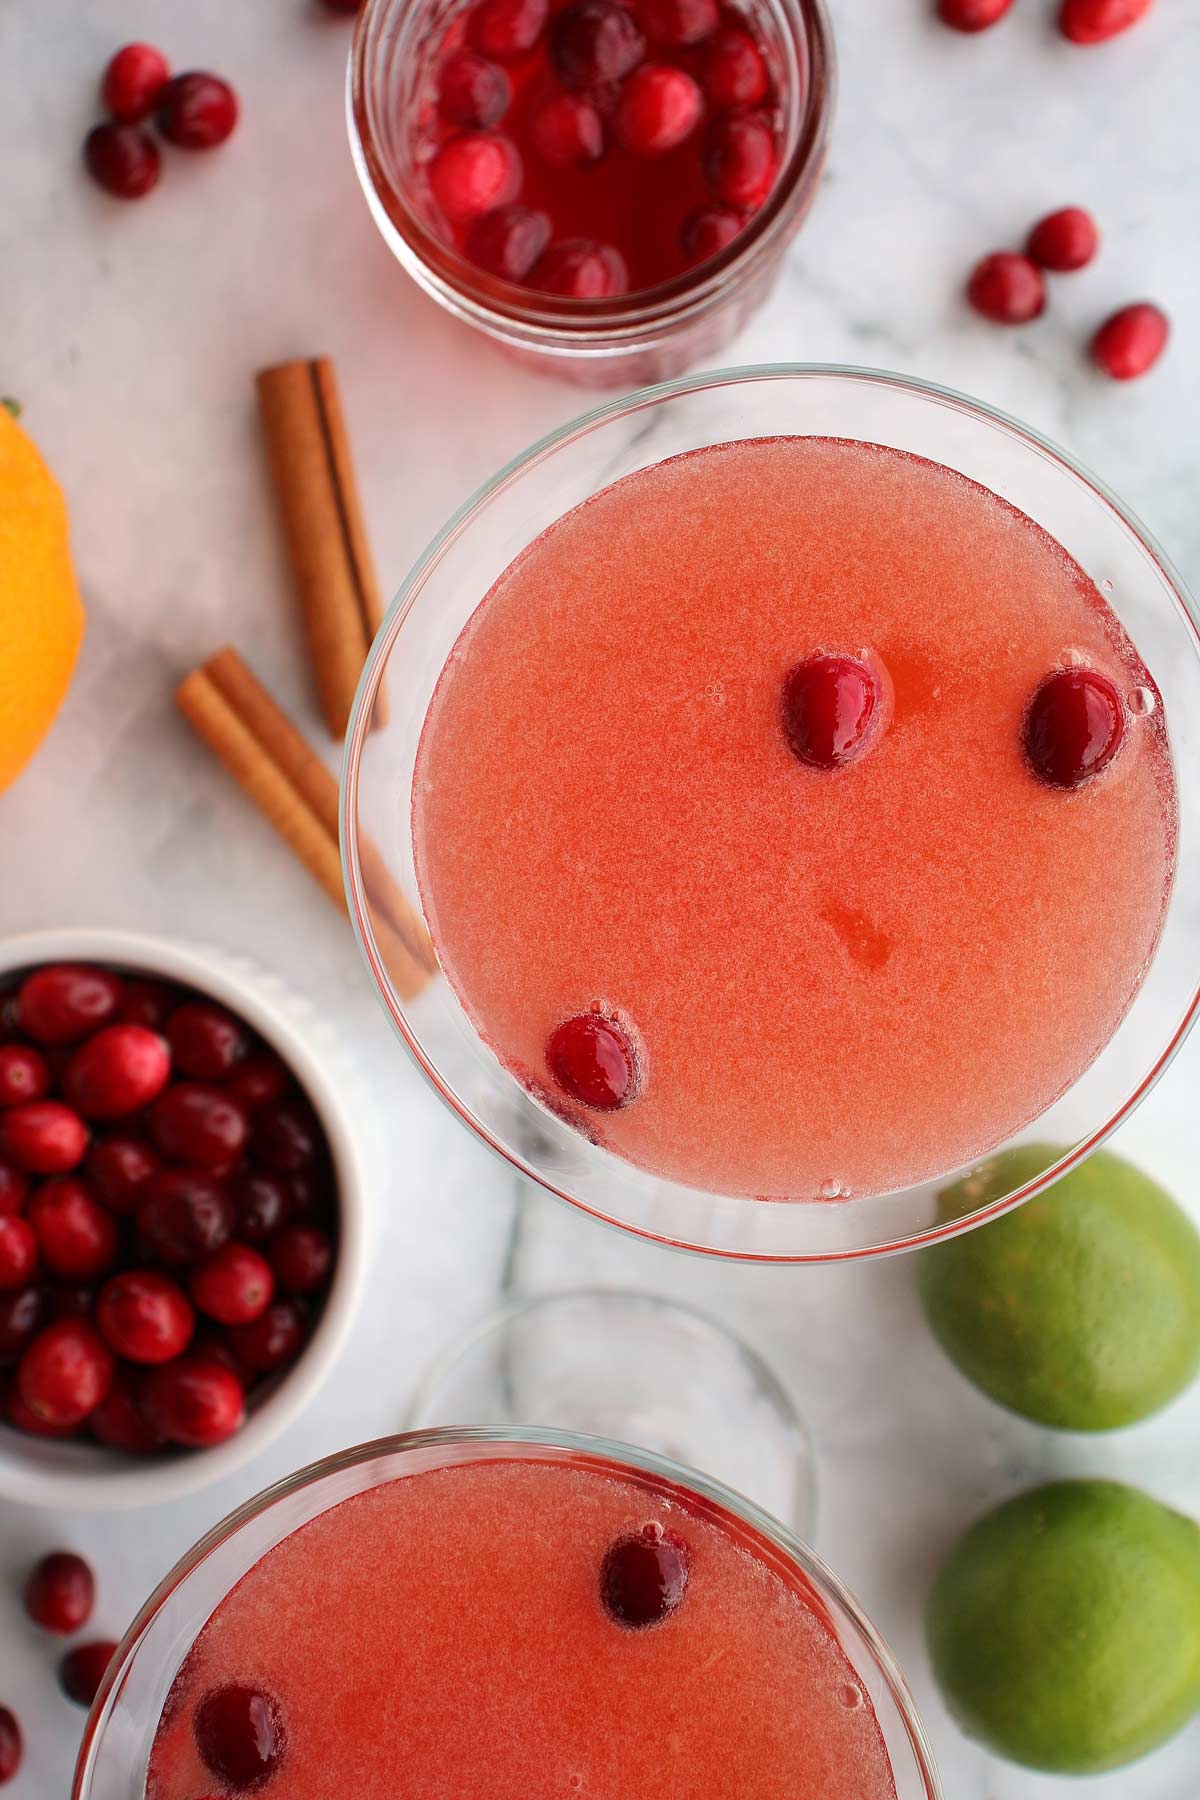 Two cranberry daiquiris, cranberries, cinnamon sticks, and limes on a marble surface.